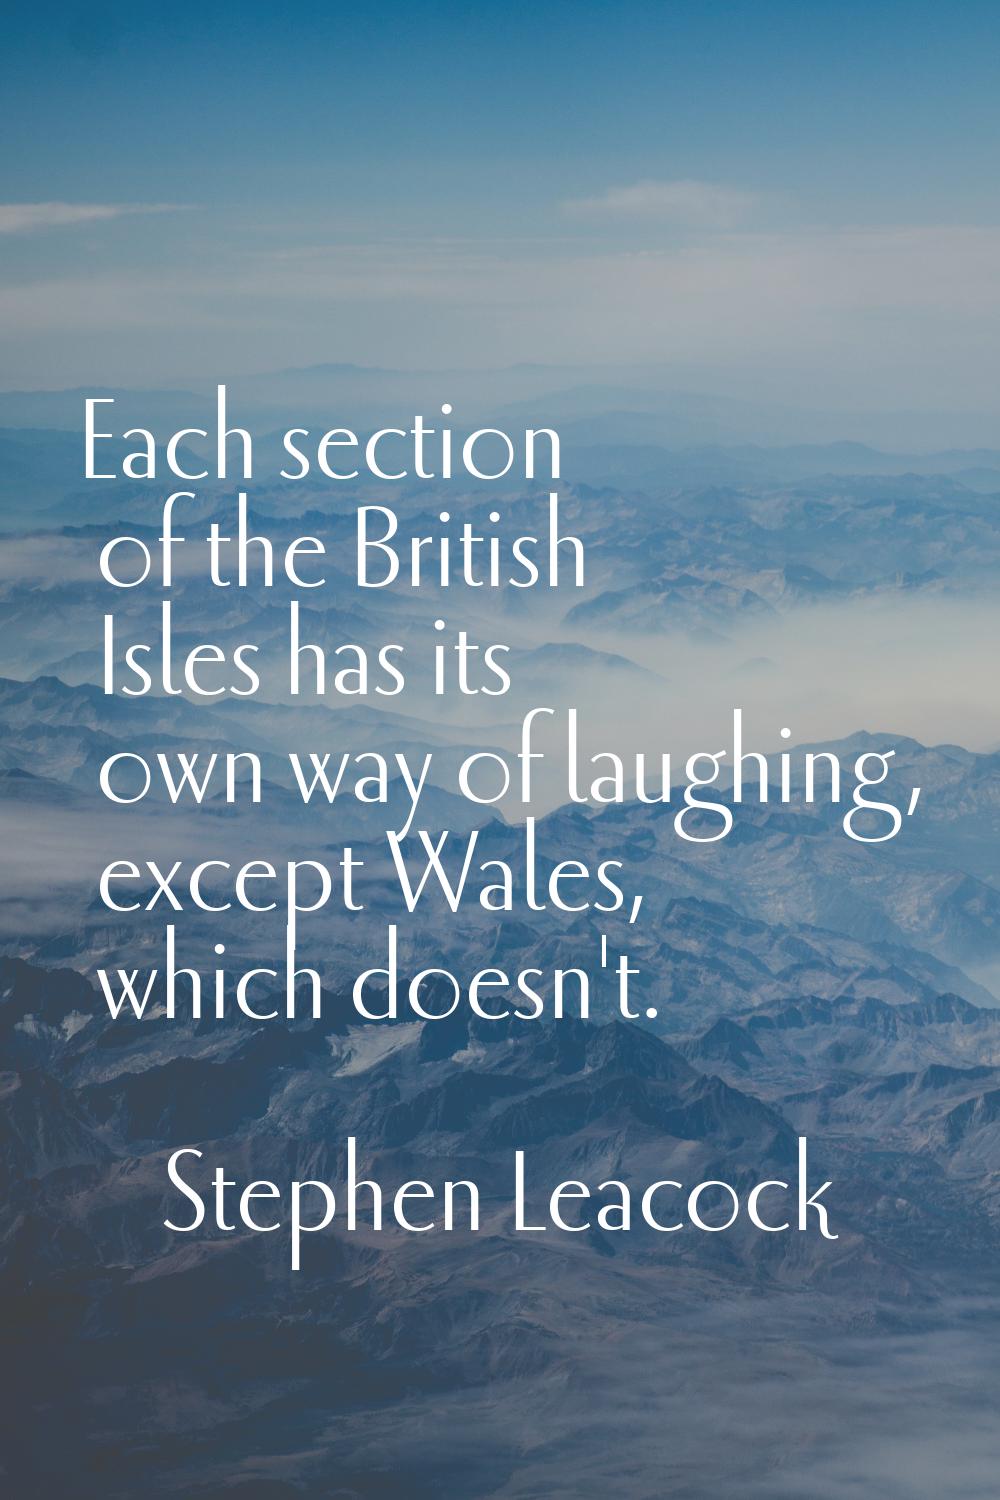 Each section of the British Isles has its own way of laughing, except Wales, which doesn't.